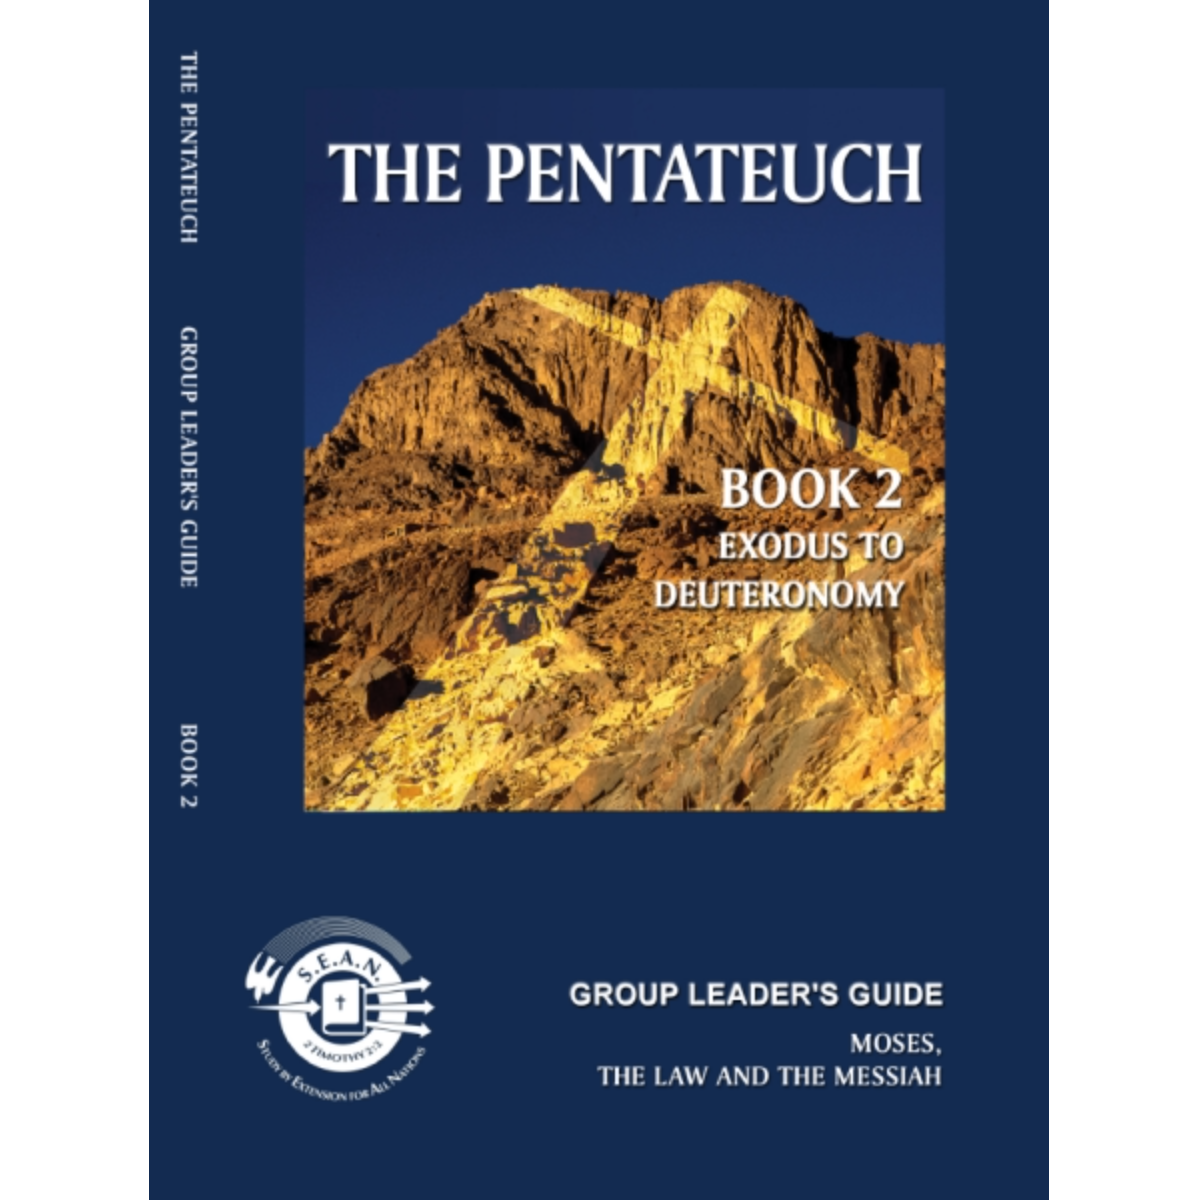 The Pentateuch Book 2 - Leader's Guide (English)